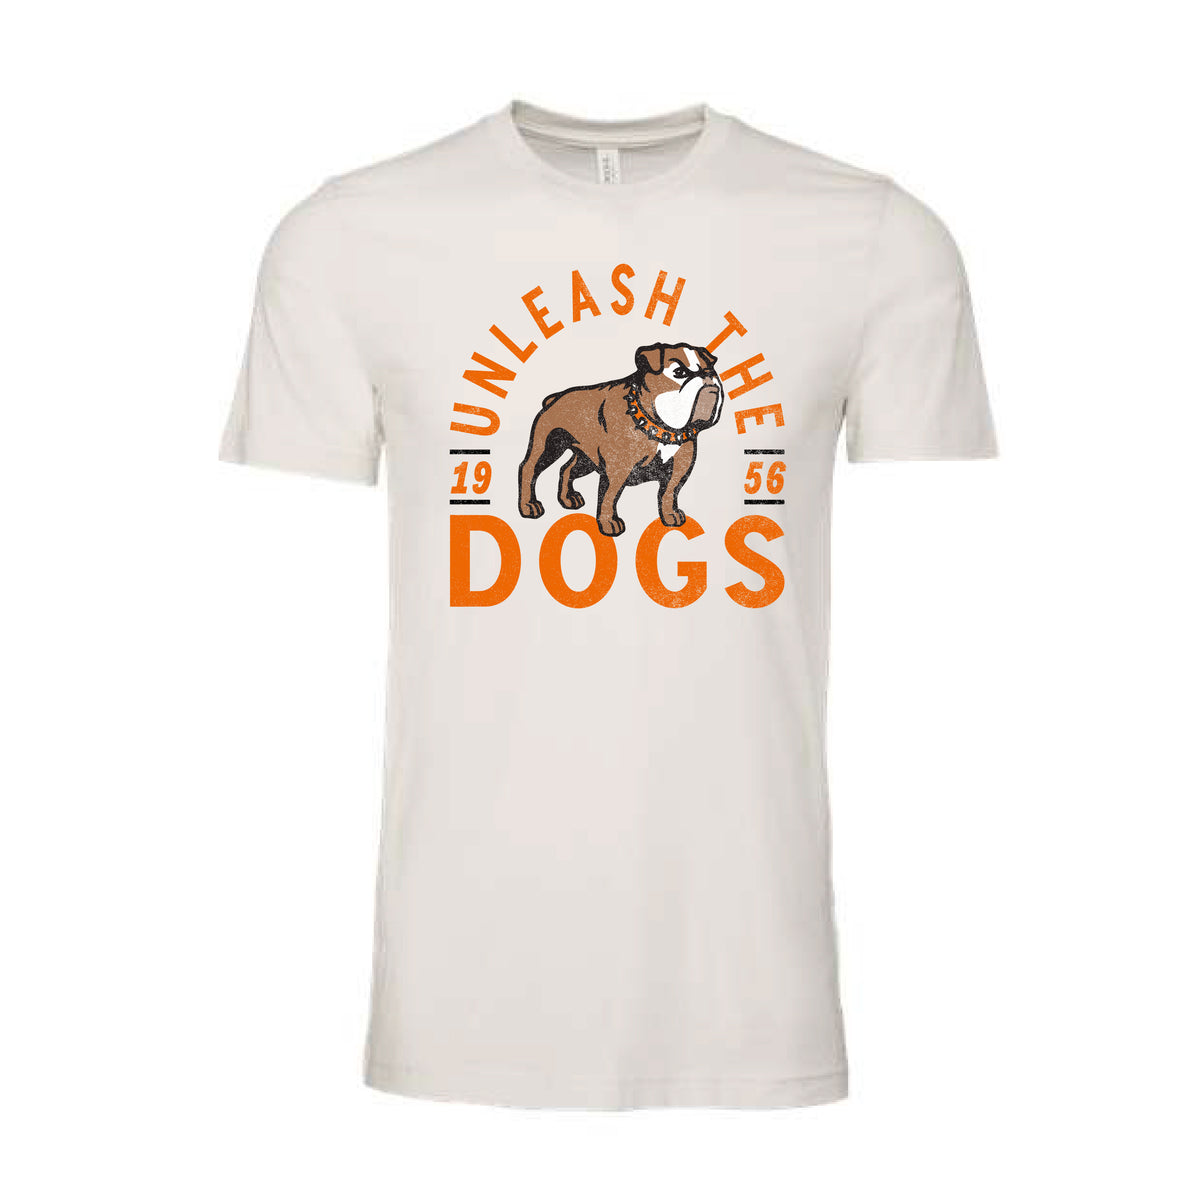 White graphic T-shirt displaying the words "unleash the dogs" and "1956 in orange lettering surrounding graphic of bulldog